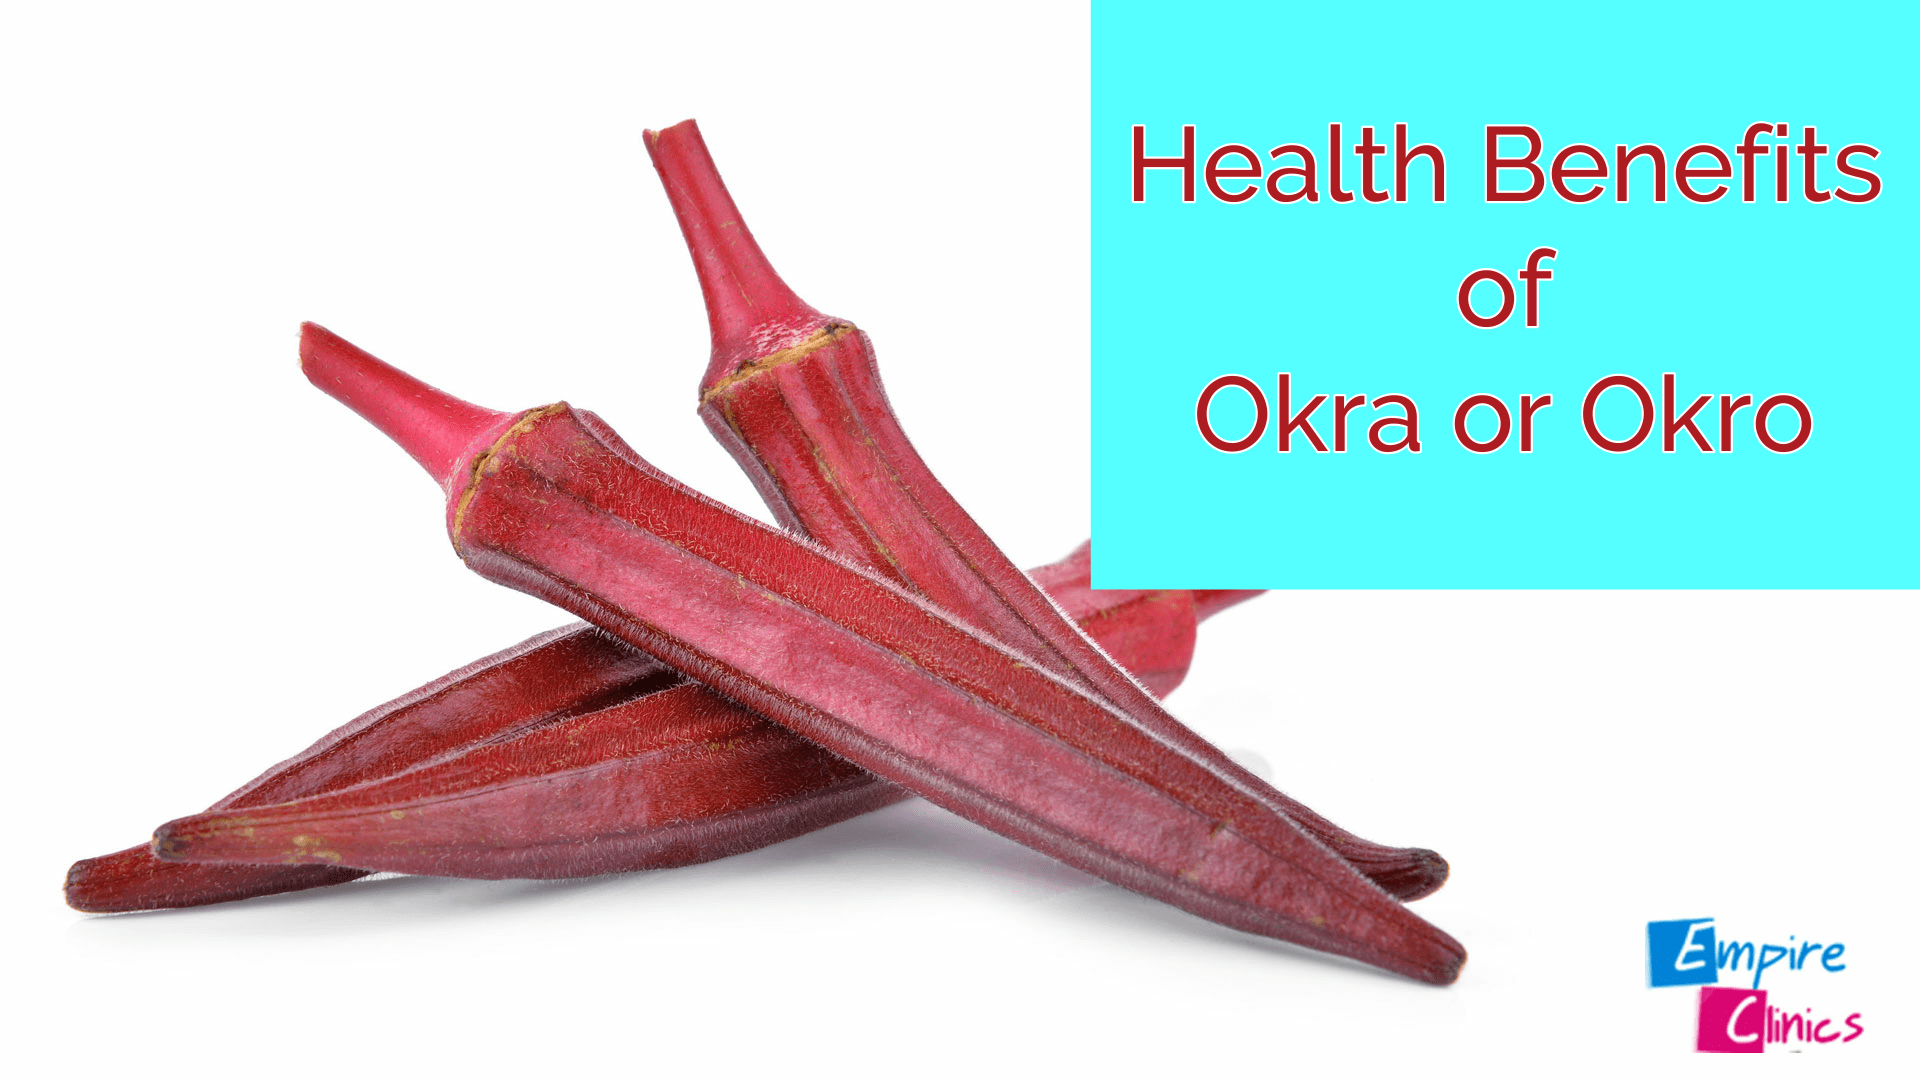 Health Benefits of Okra or lady's finger